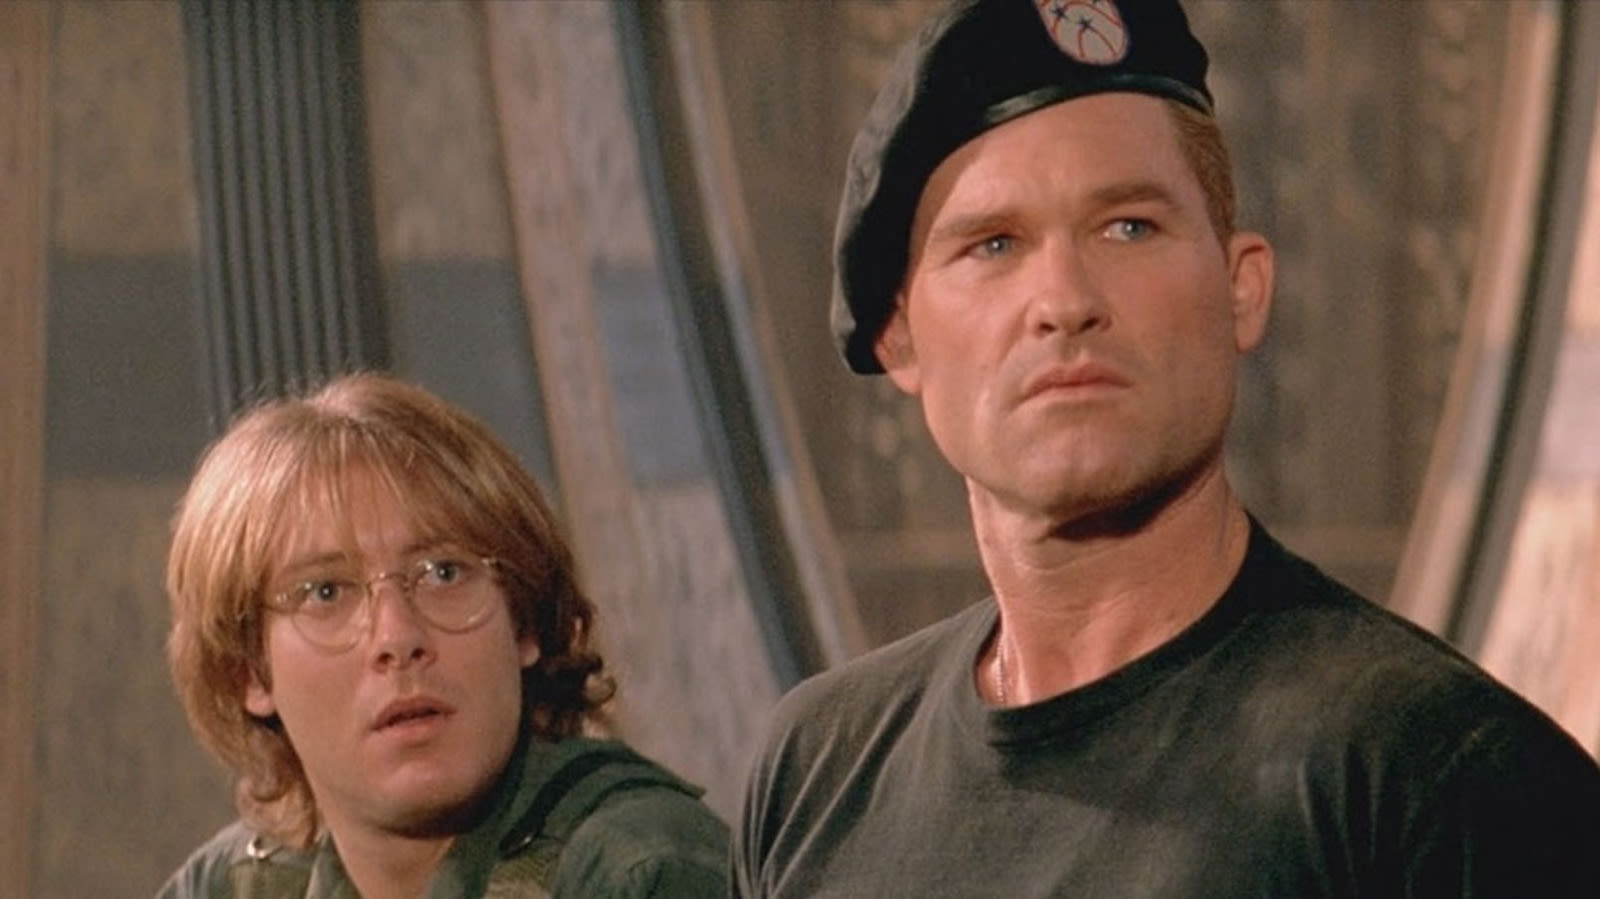 Kurt Russell Had To Drag James Spader Out Of His Trailer For Stargate - SlashFilm